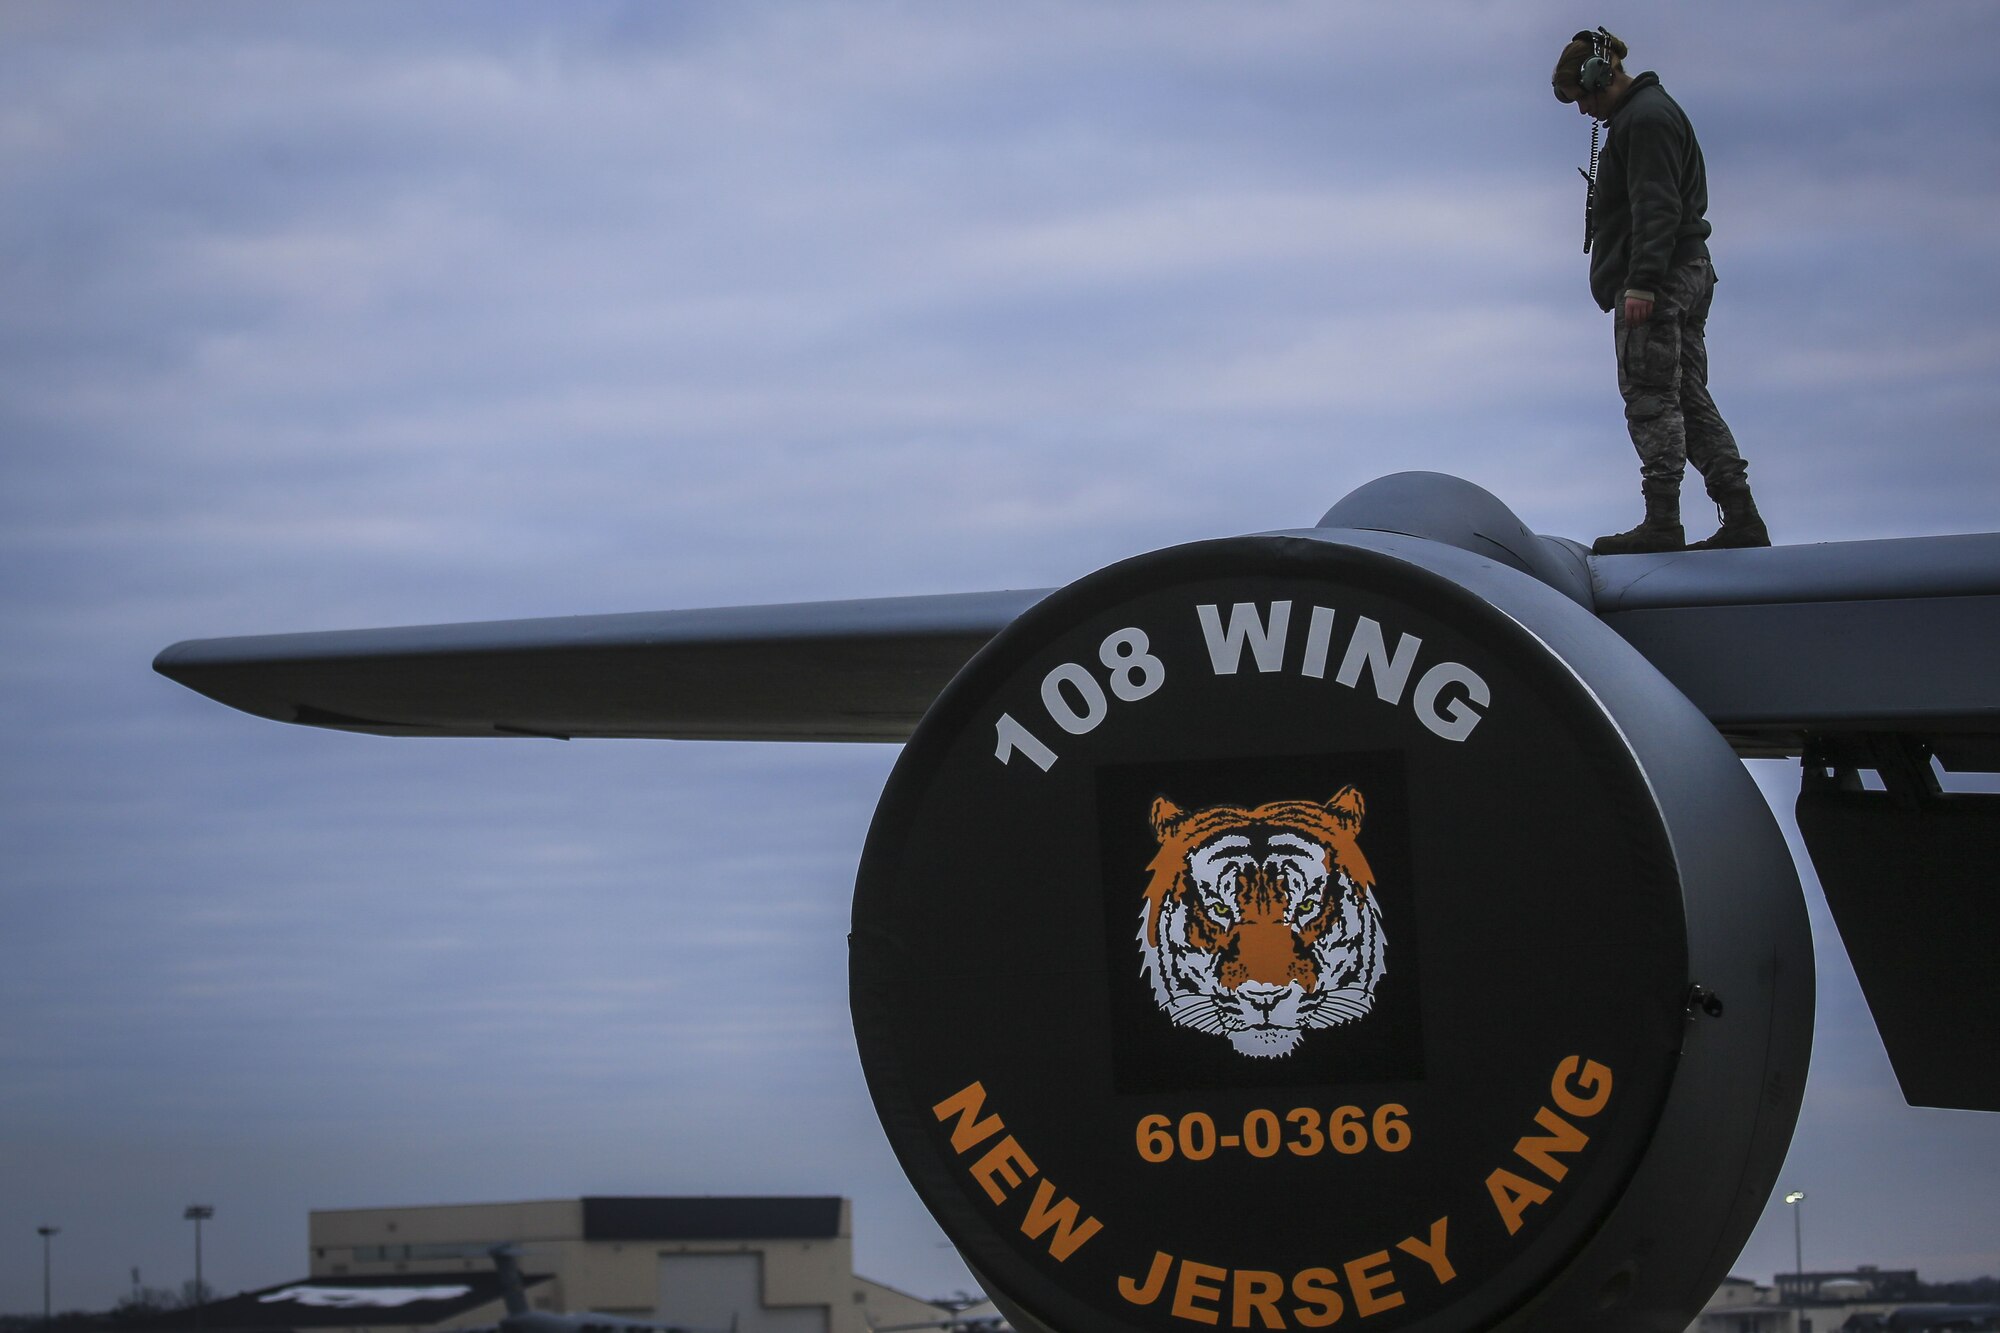 A New Jersey Air National Guard KC-135R Stratotanker crew chief from the 108th Wing checks the wings for imperfections before a flight on Joint Base McGuire-Dix-Lakehurst, N.J., Jan. 11, 2018. (U.S. Air National Guard photo by Master Sgt. Matt Hecht)